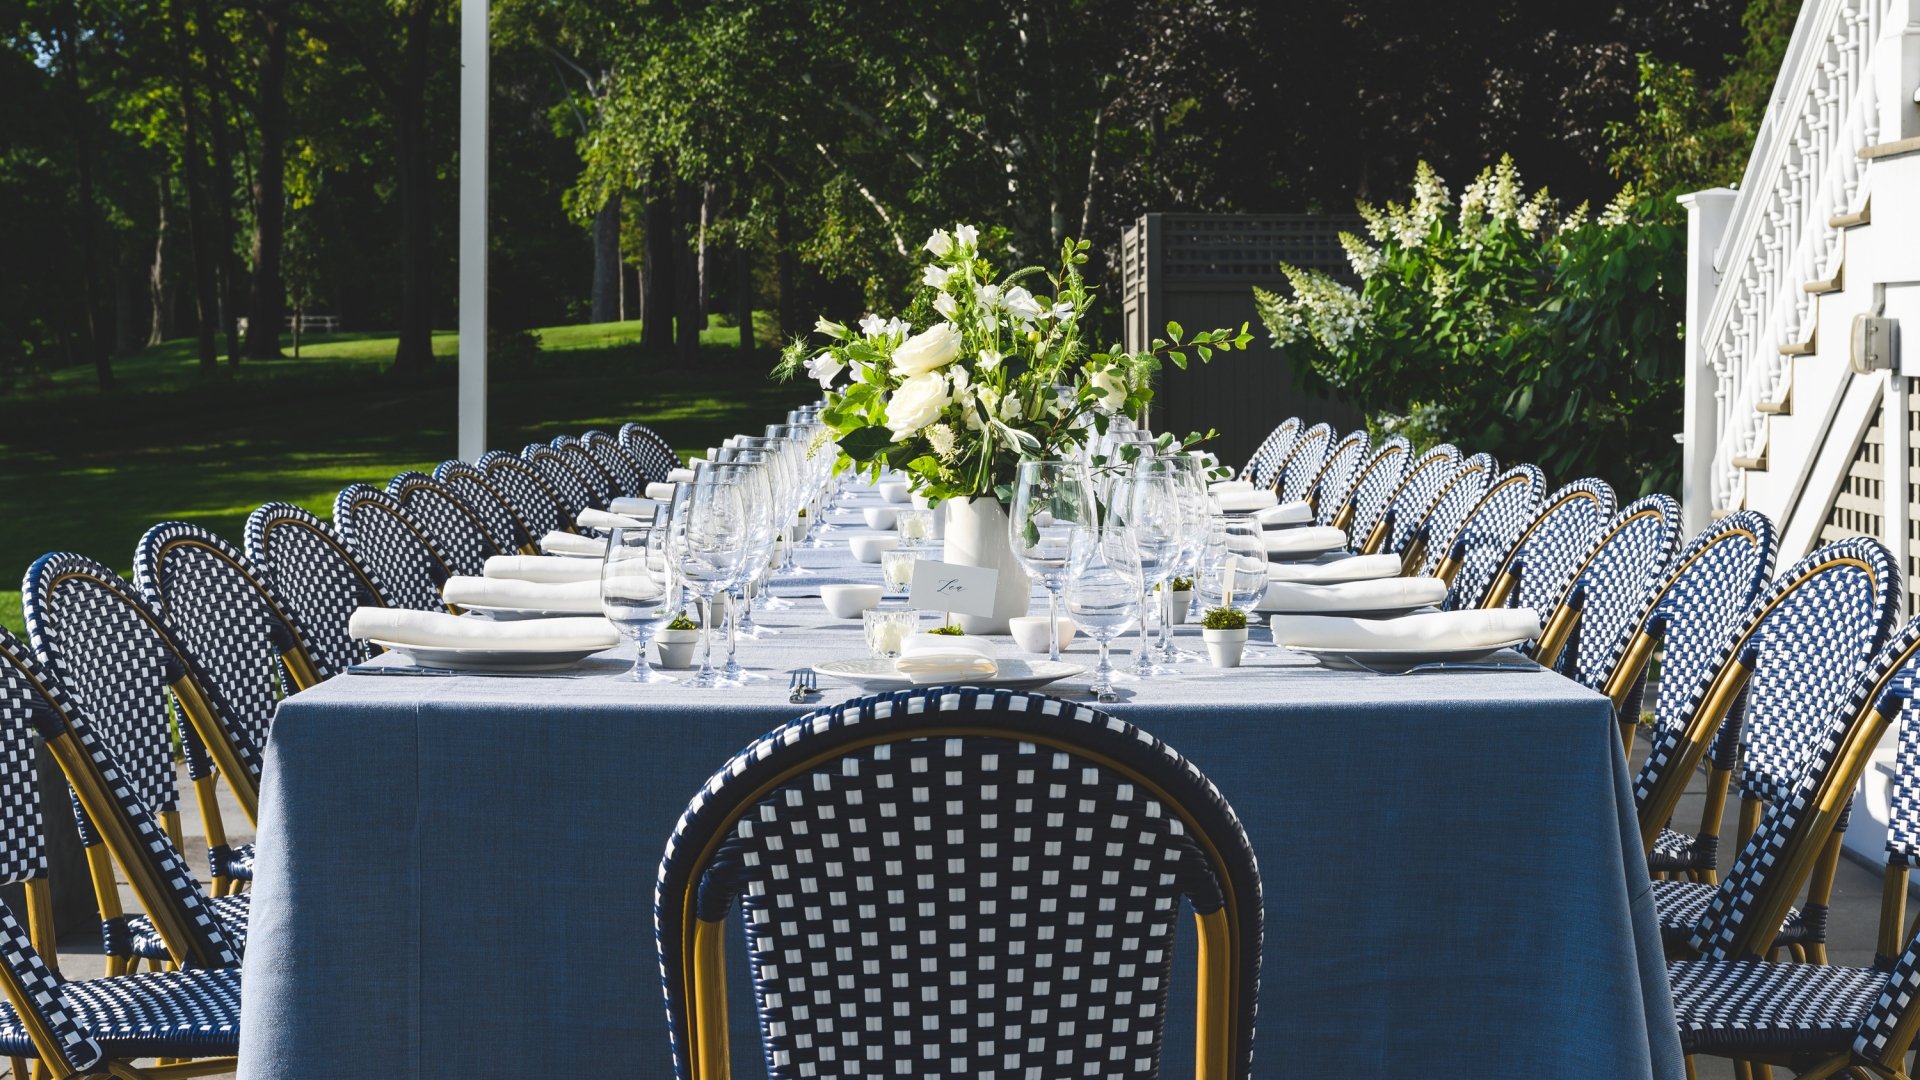 A blue table setup with for a rehearsal dinner.